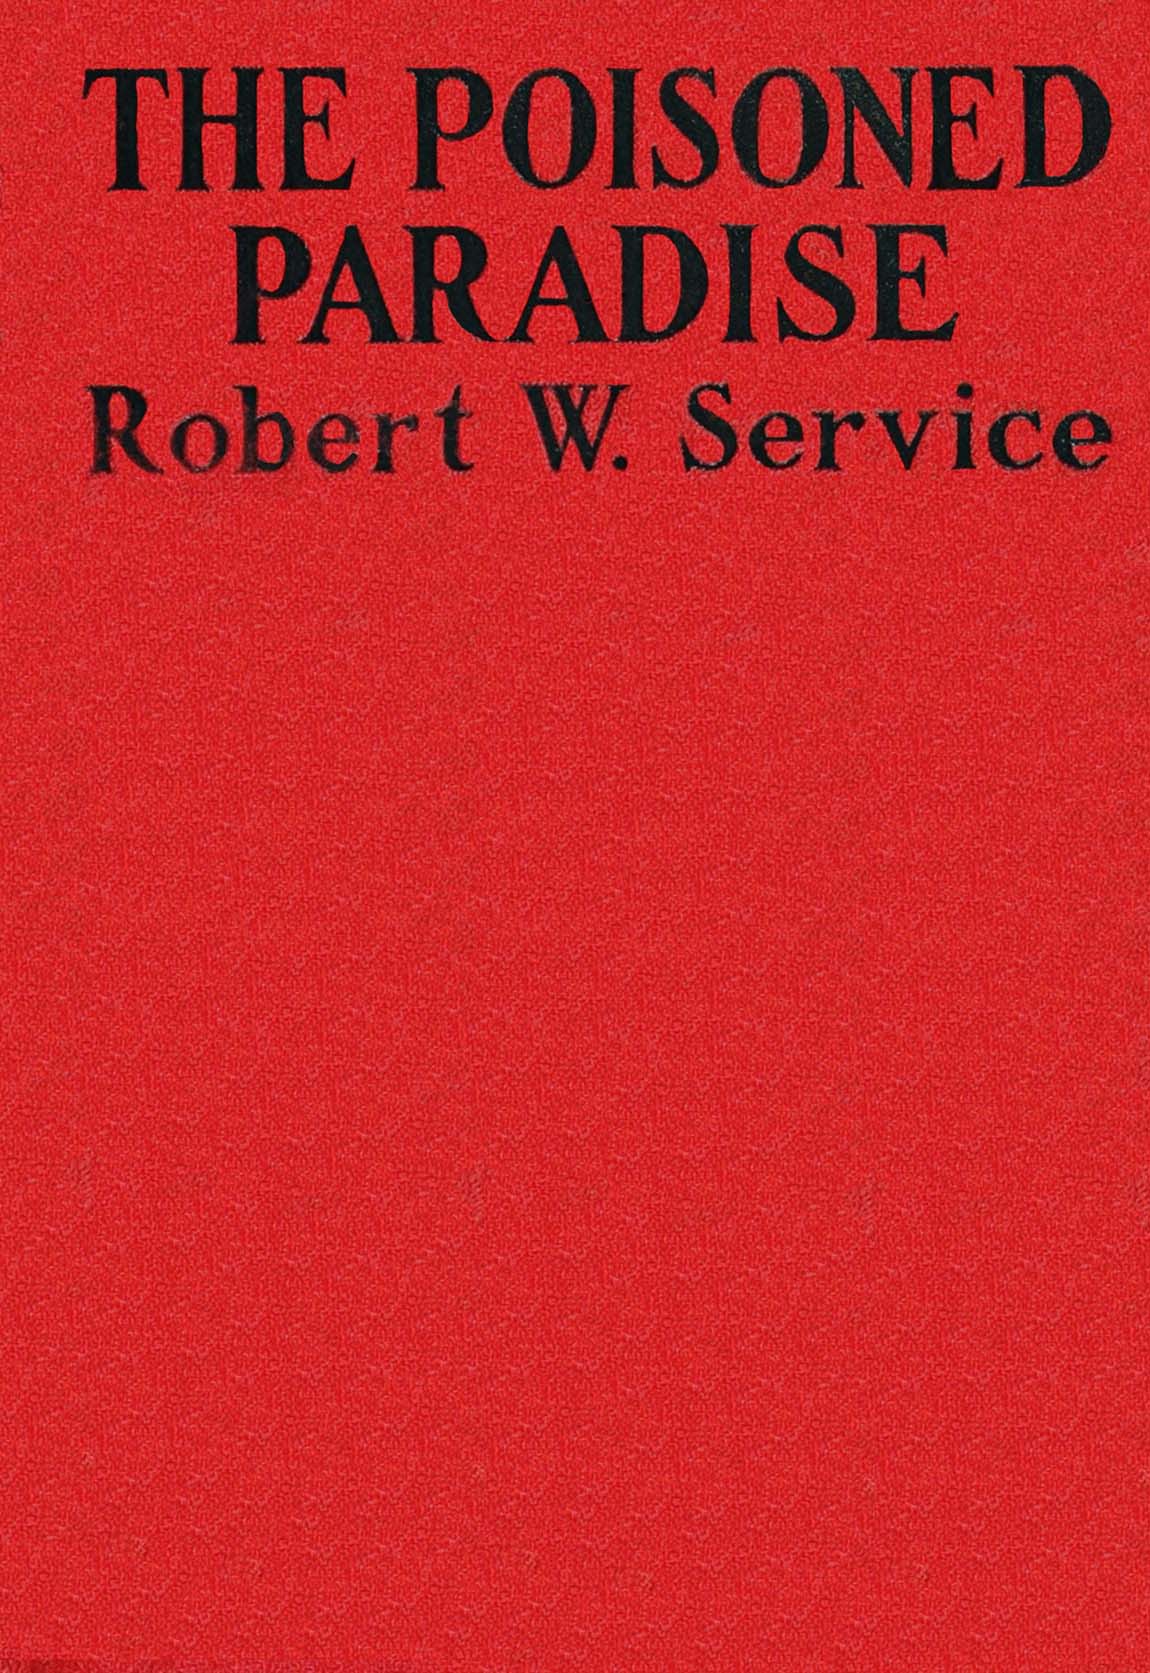 The poisoned paradise, by Robert W image